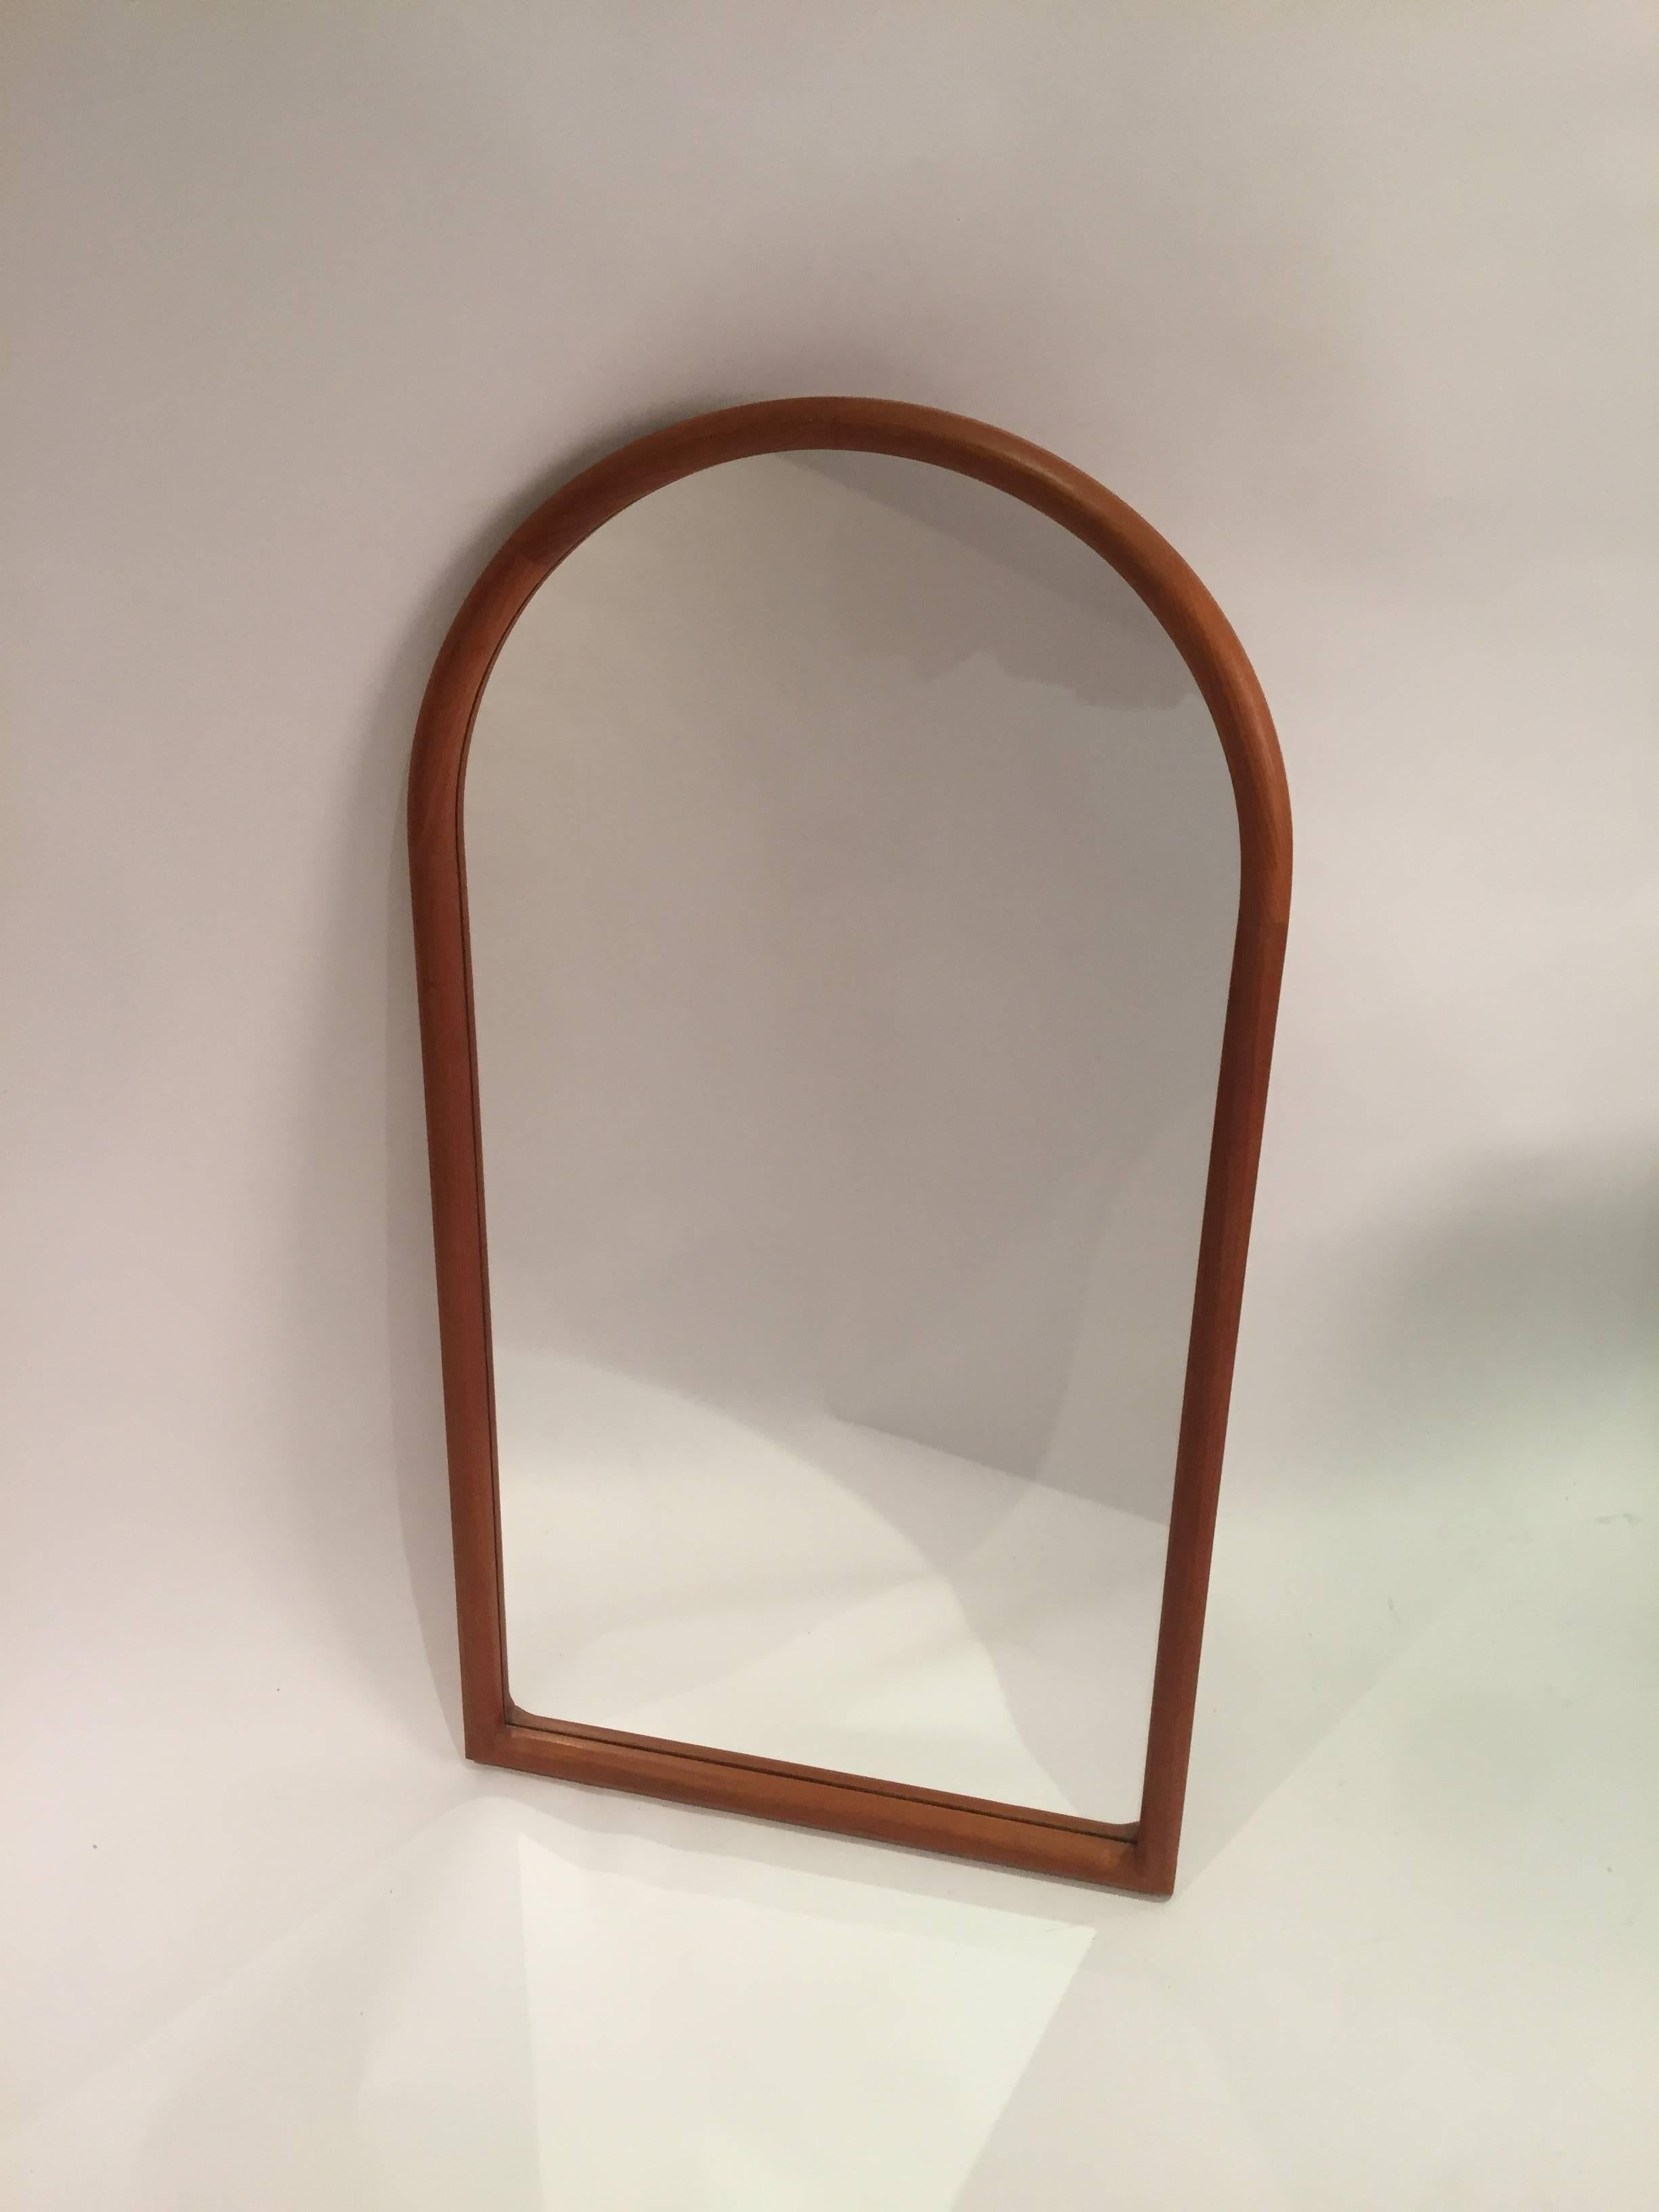 Simple sleek and classic mirror by Kai Kristiansen with an arched top. Wall hanging mirror features a rounded edge frame with dovetailed corners and curved top.
   